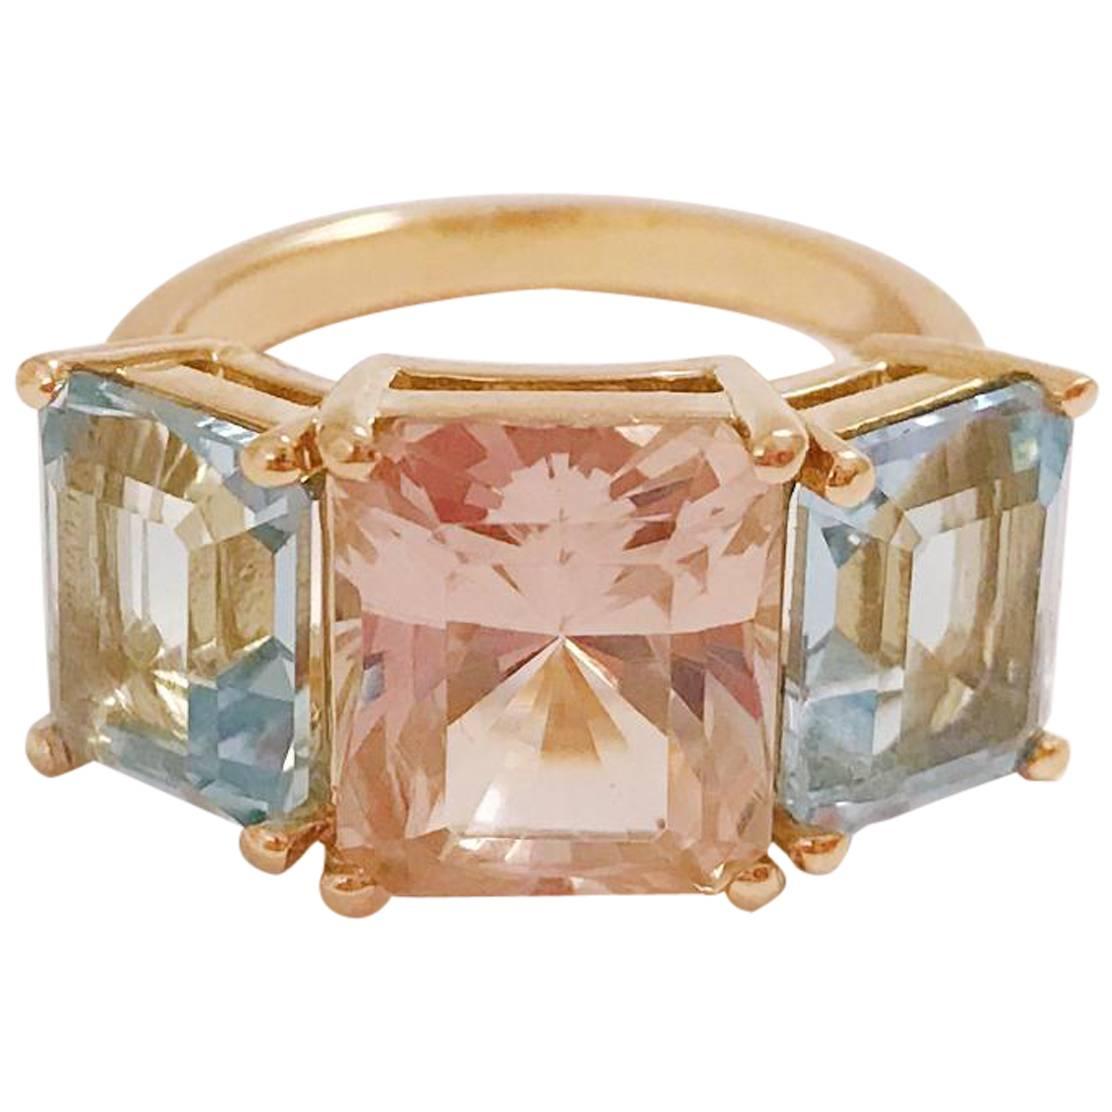 Yellow Gold Semi Precious Mini Emerald Cut Ring with Pink Topaz and Peridot For Sale 1